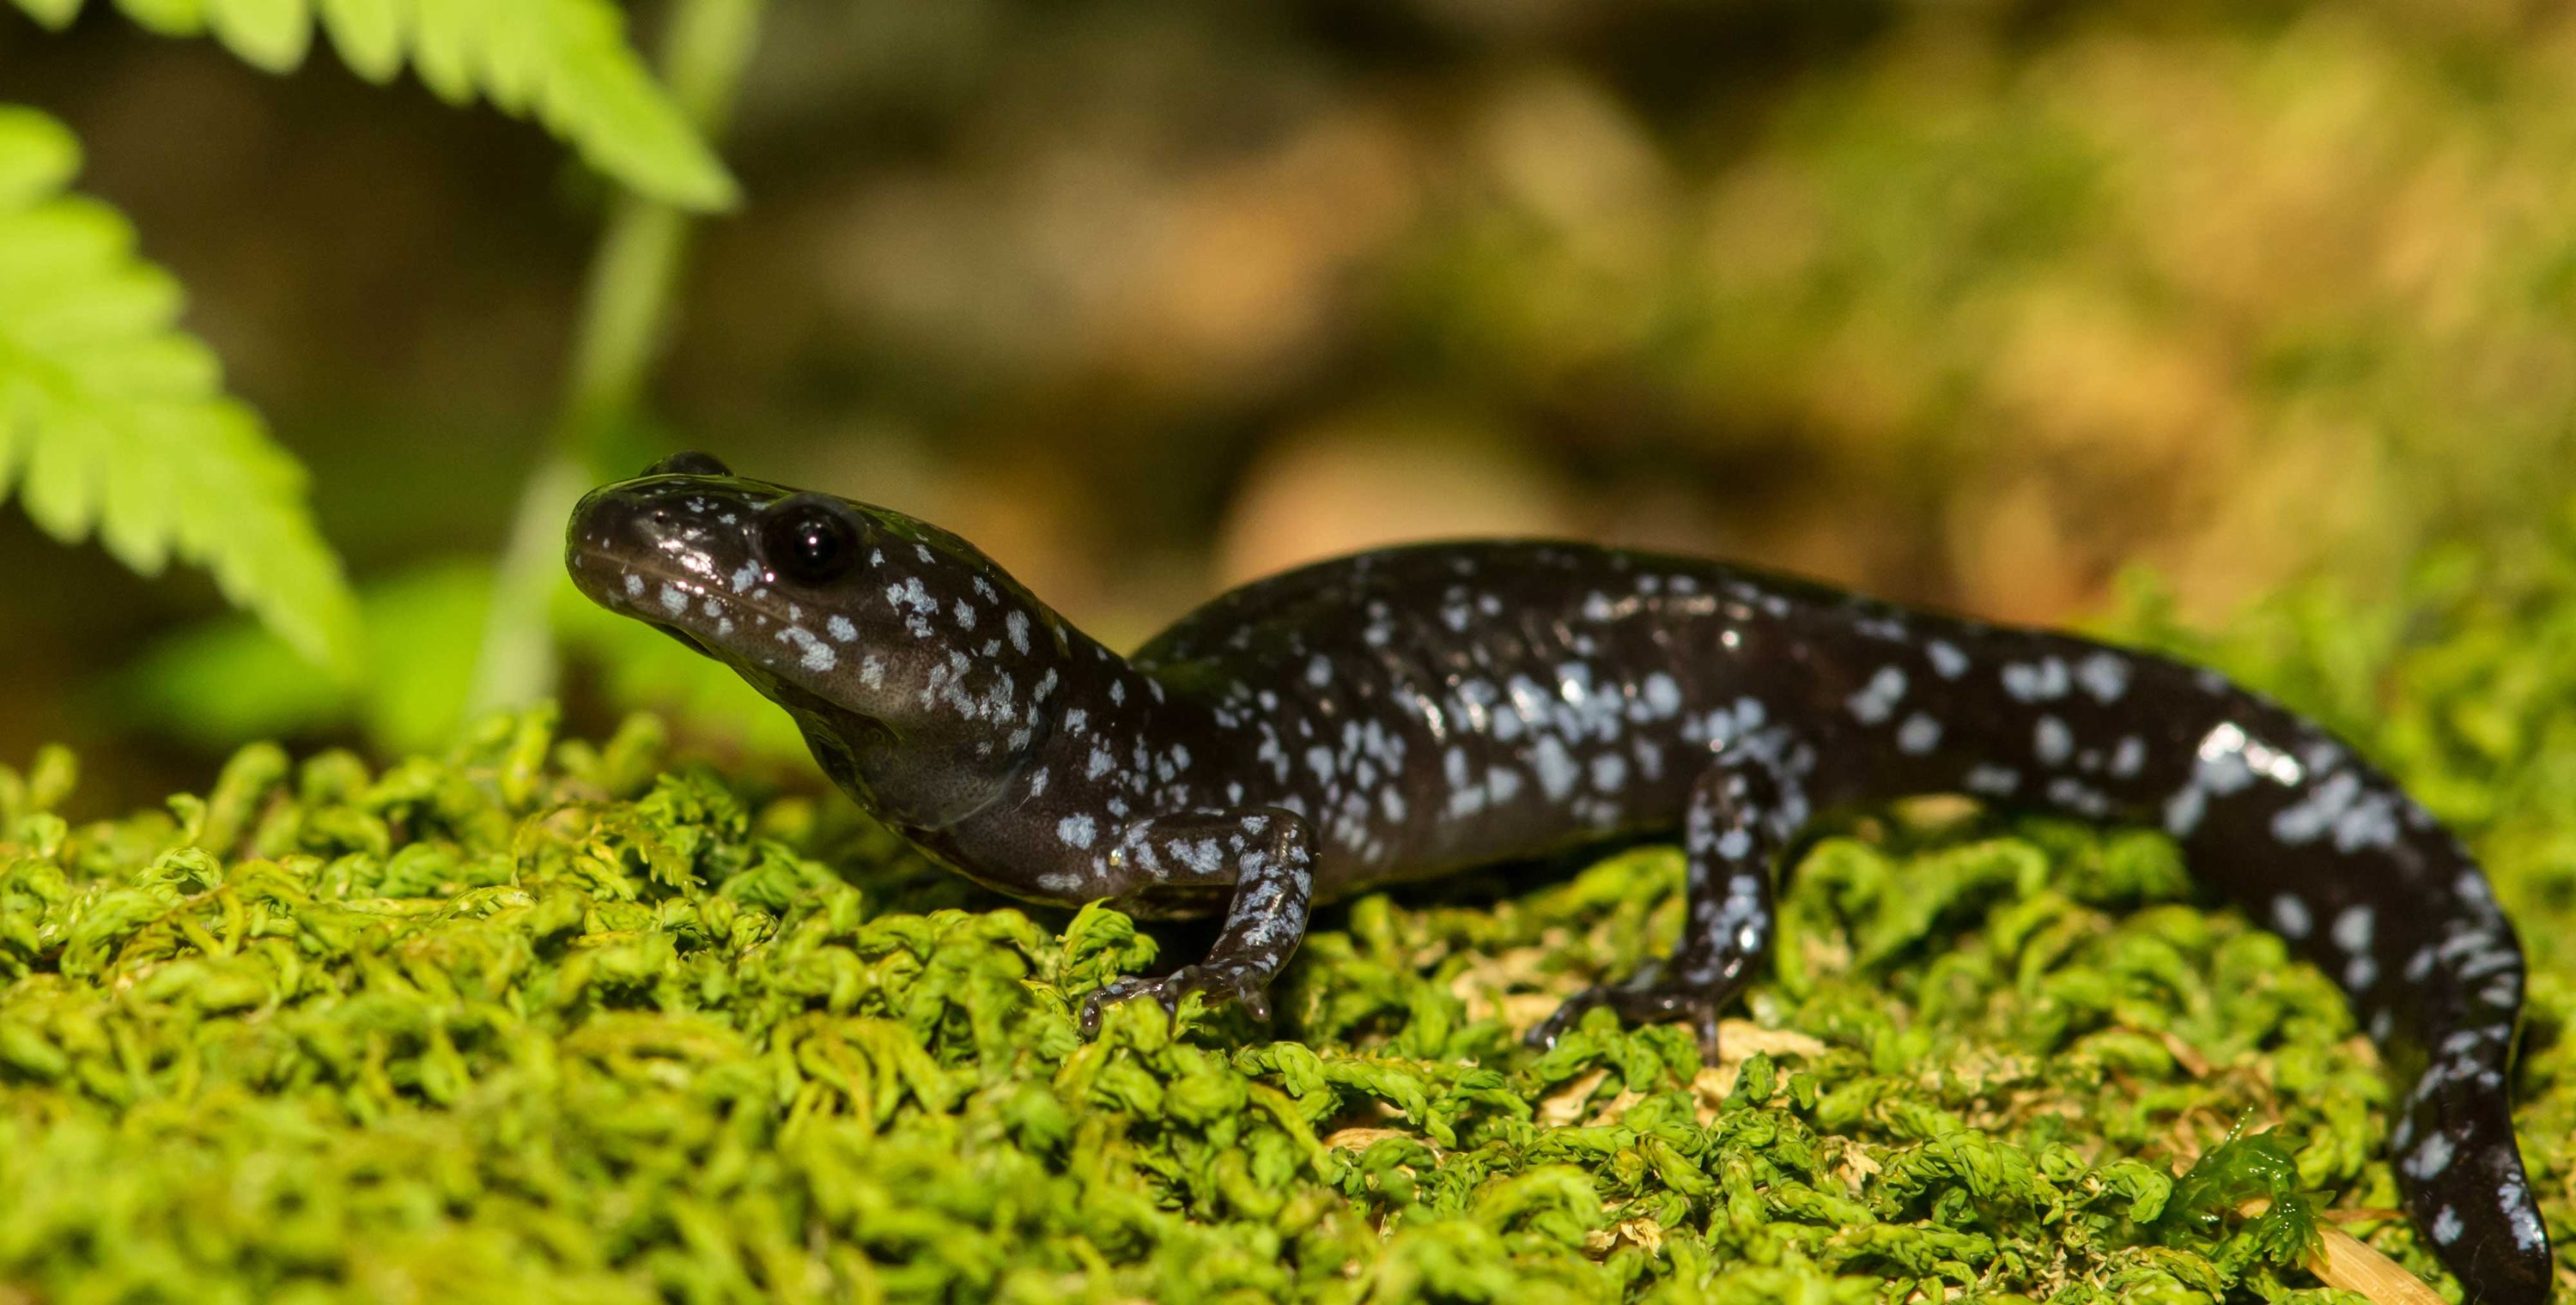 A blue-spotted salamander on a moss-covered log.